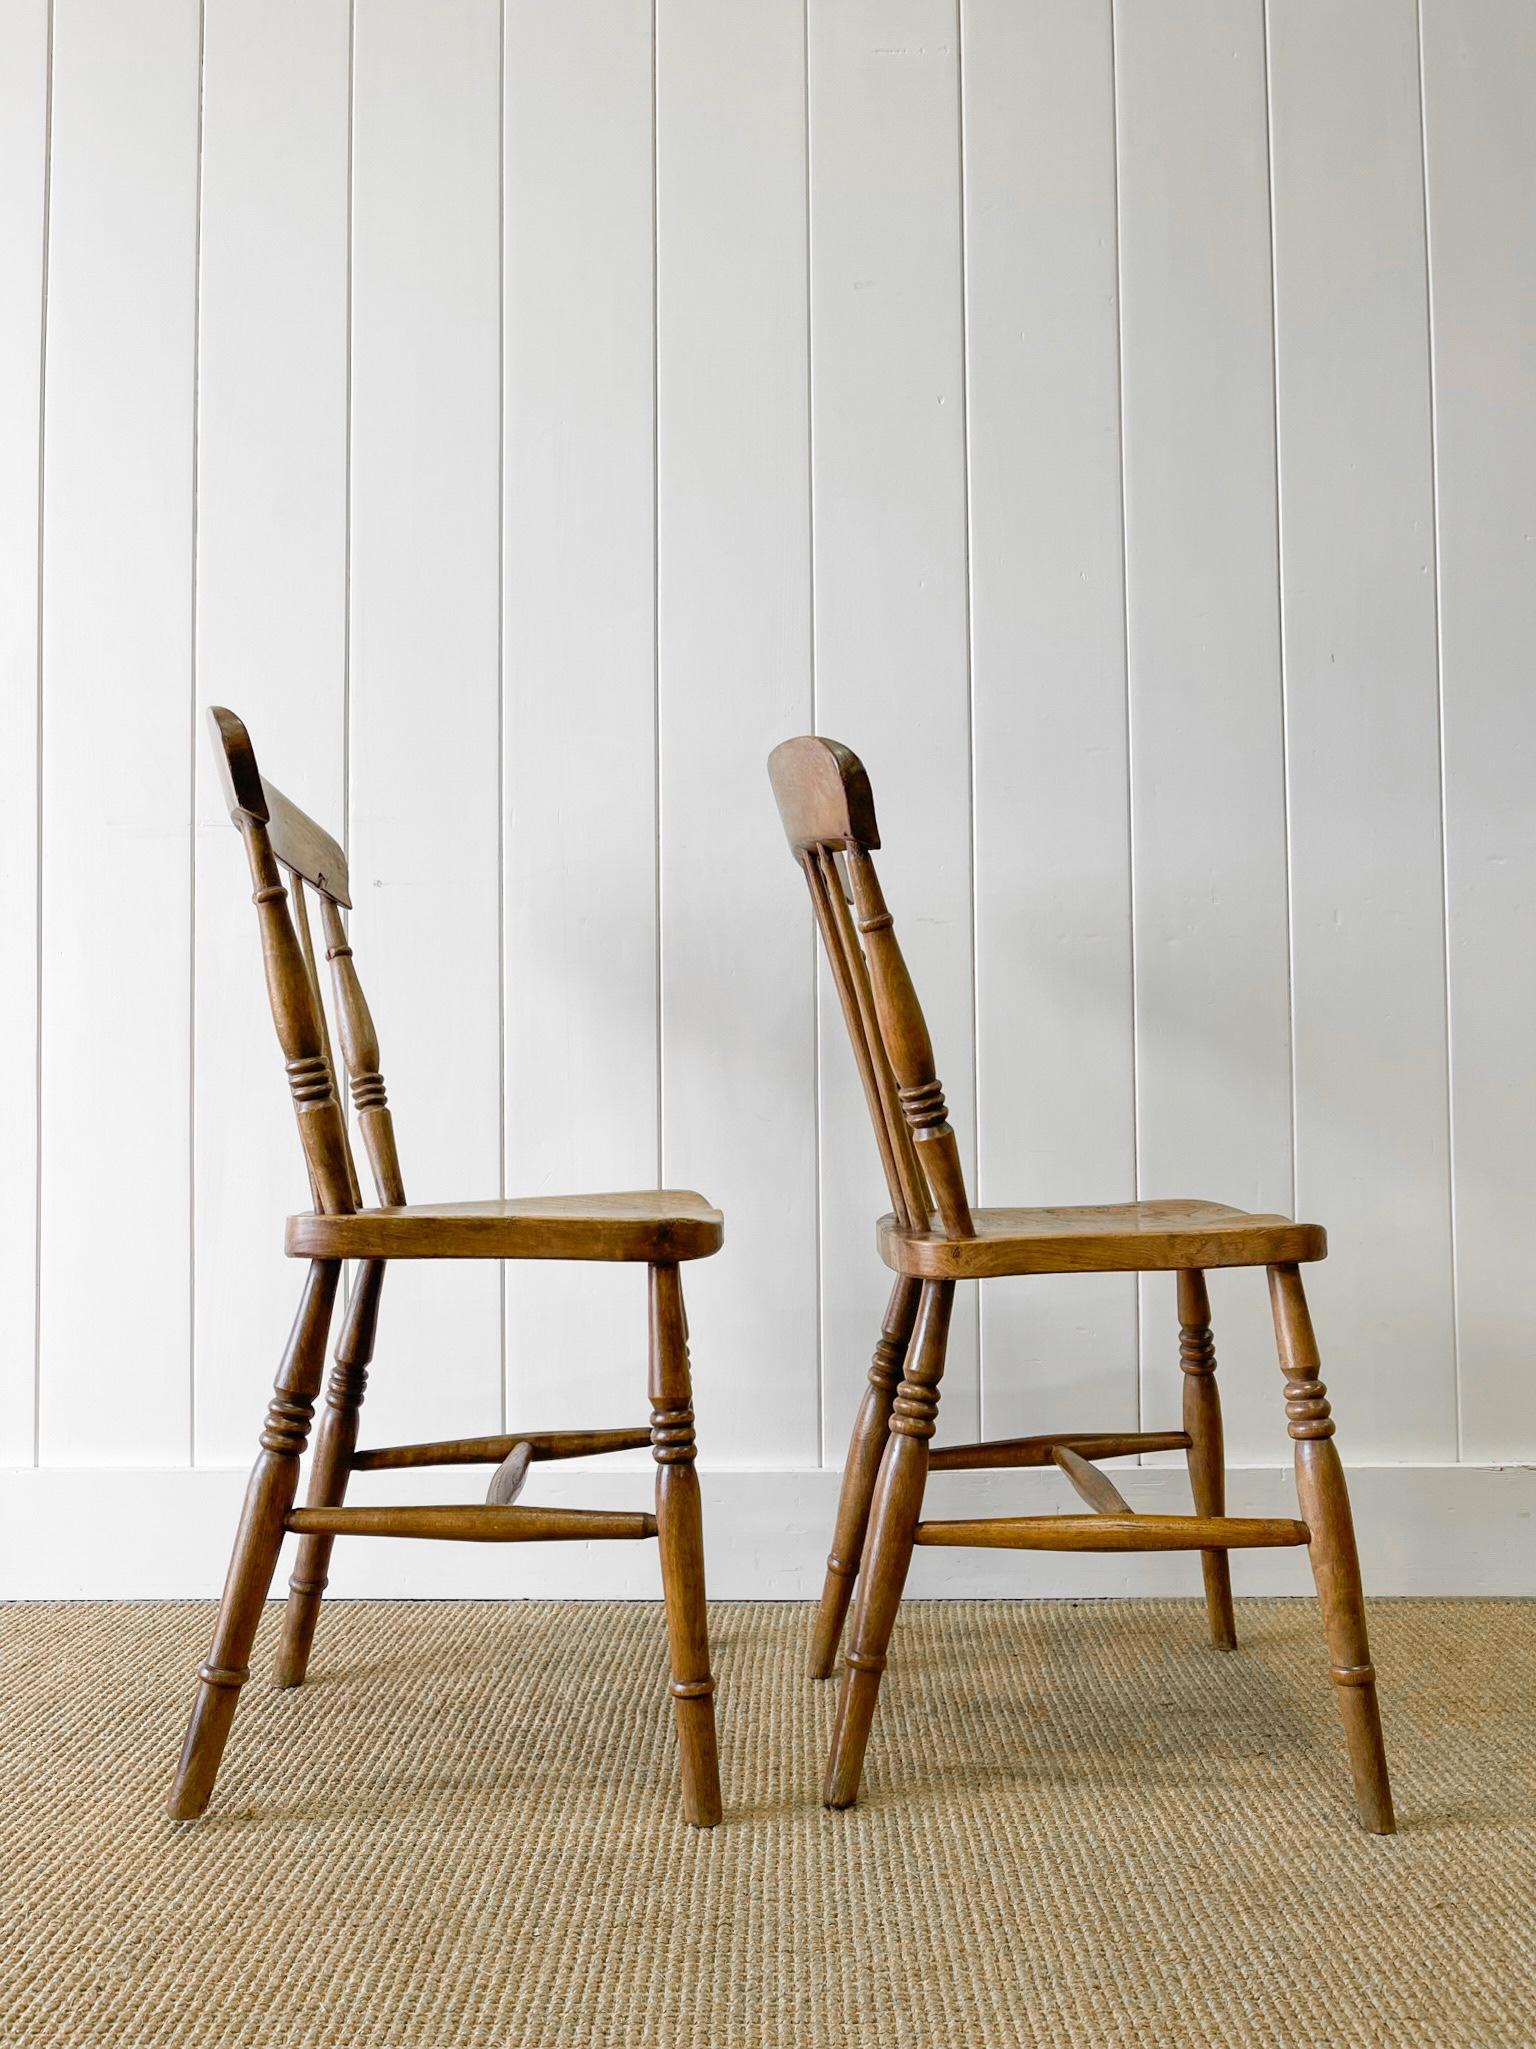 An Antique Set of 4 Early 19th Century Stick Back Chairs For Sale 11